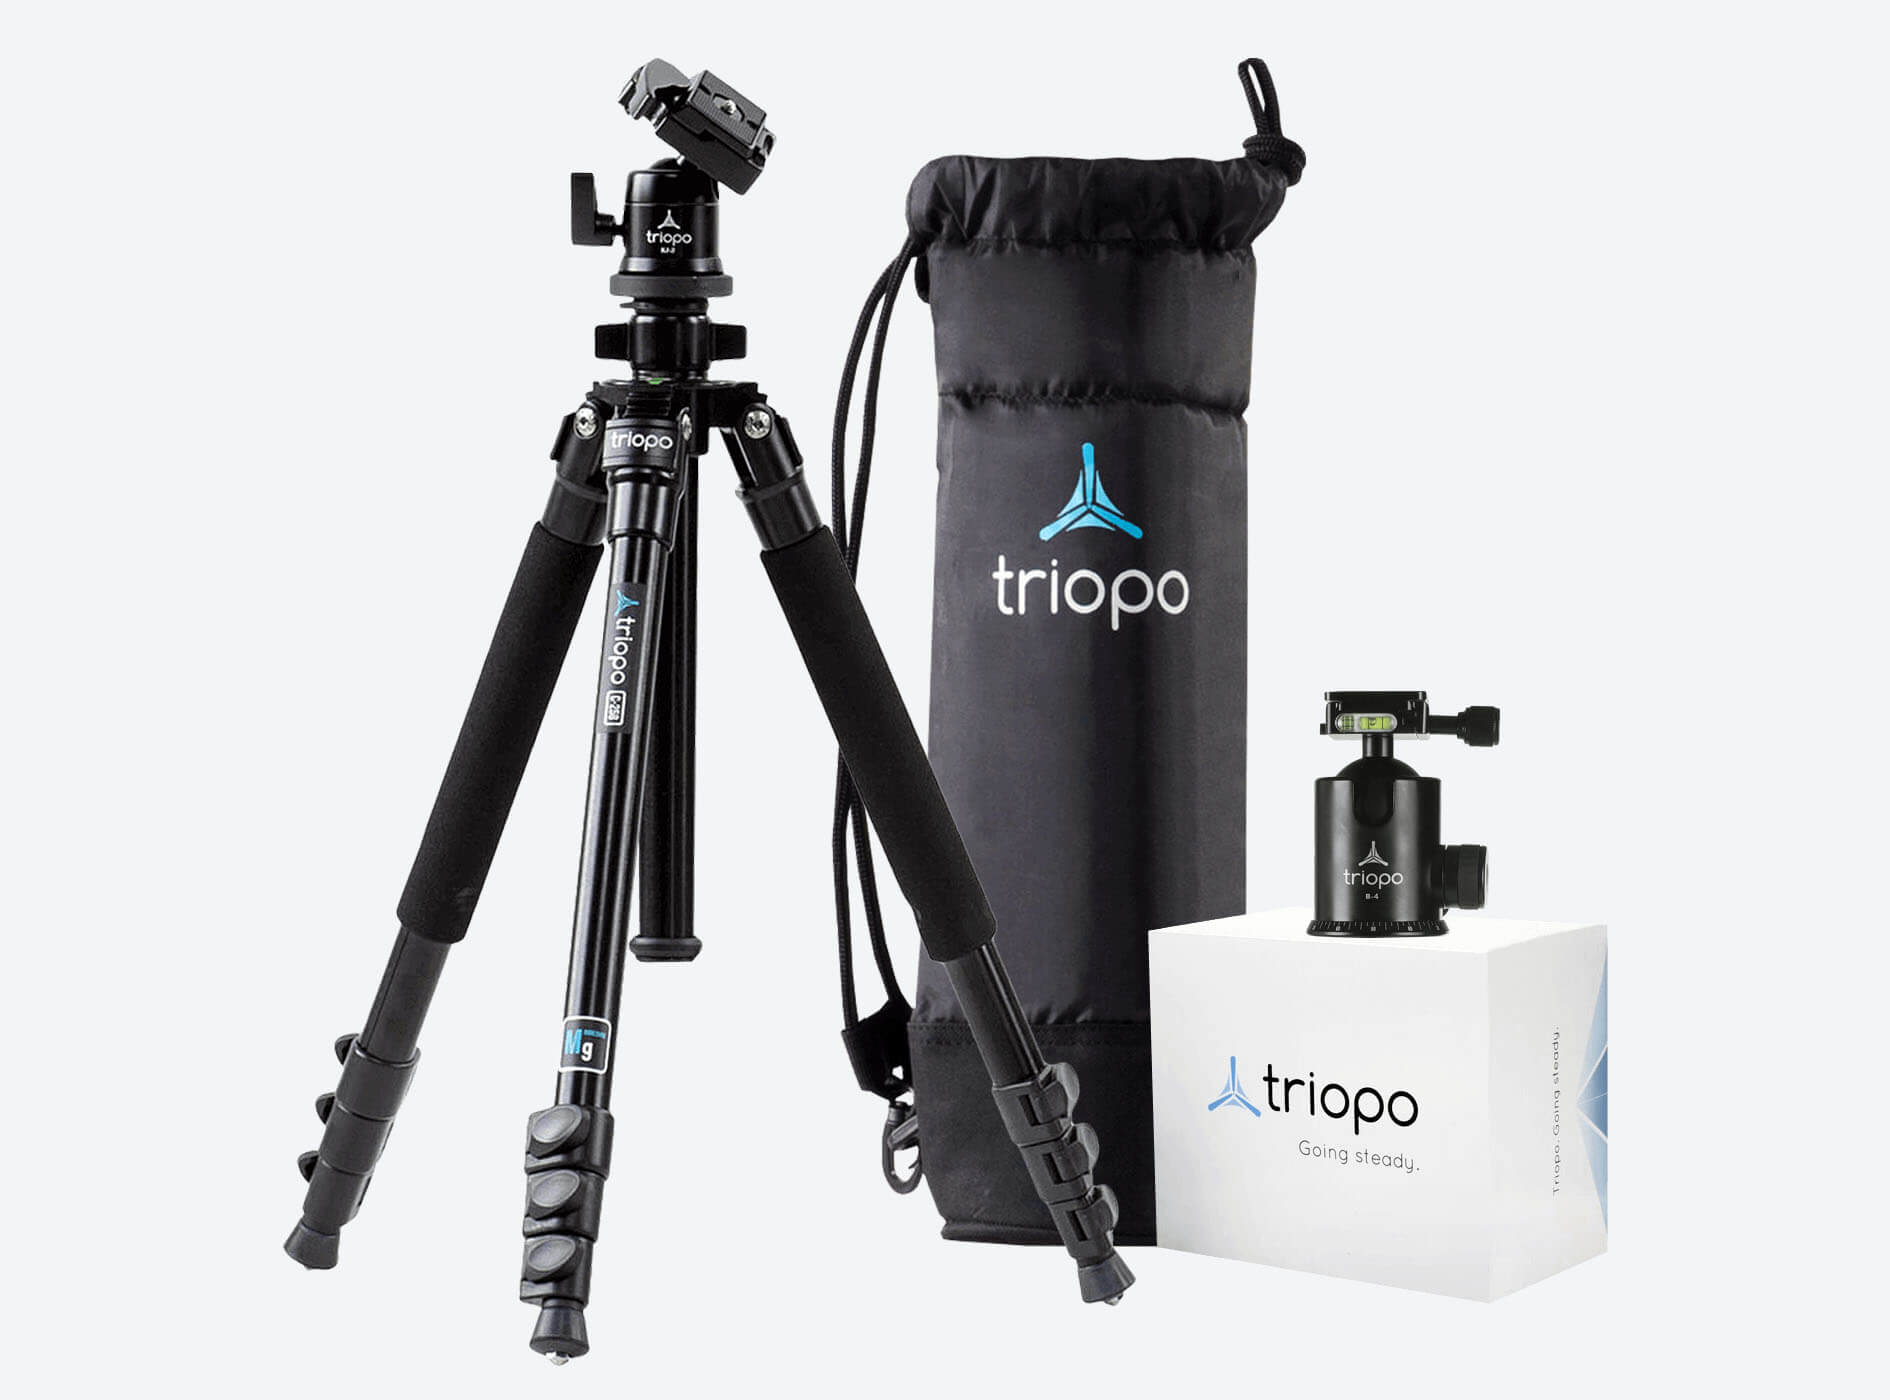 Triopo tripods, monopods and heads